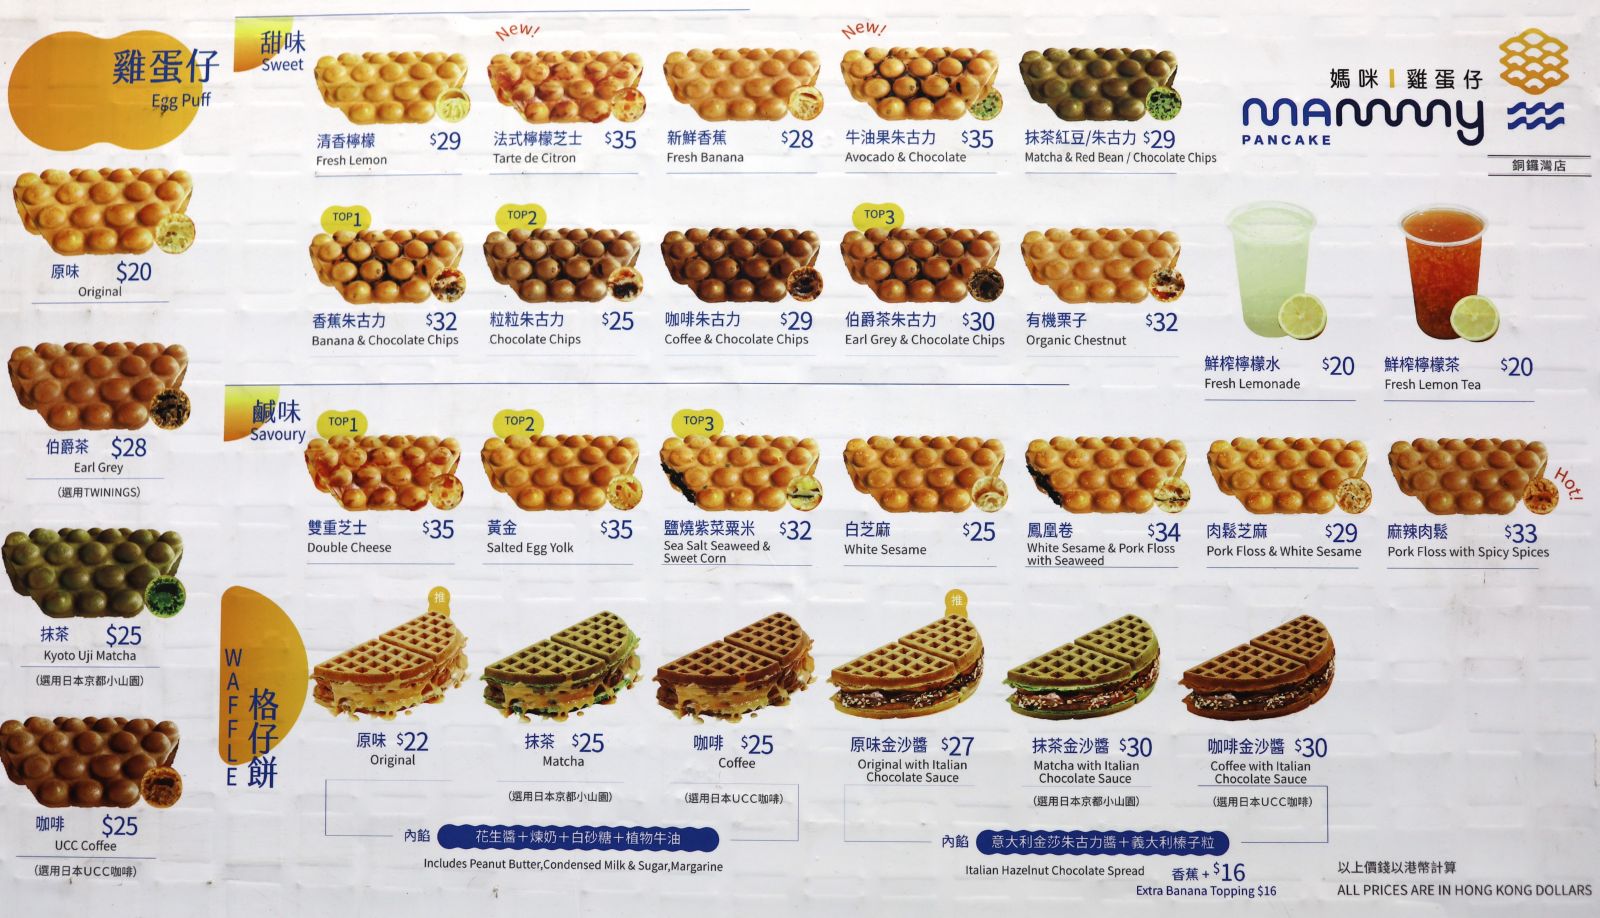 A list of different egg waffles and egg puffs provided